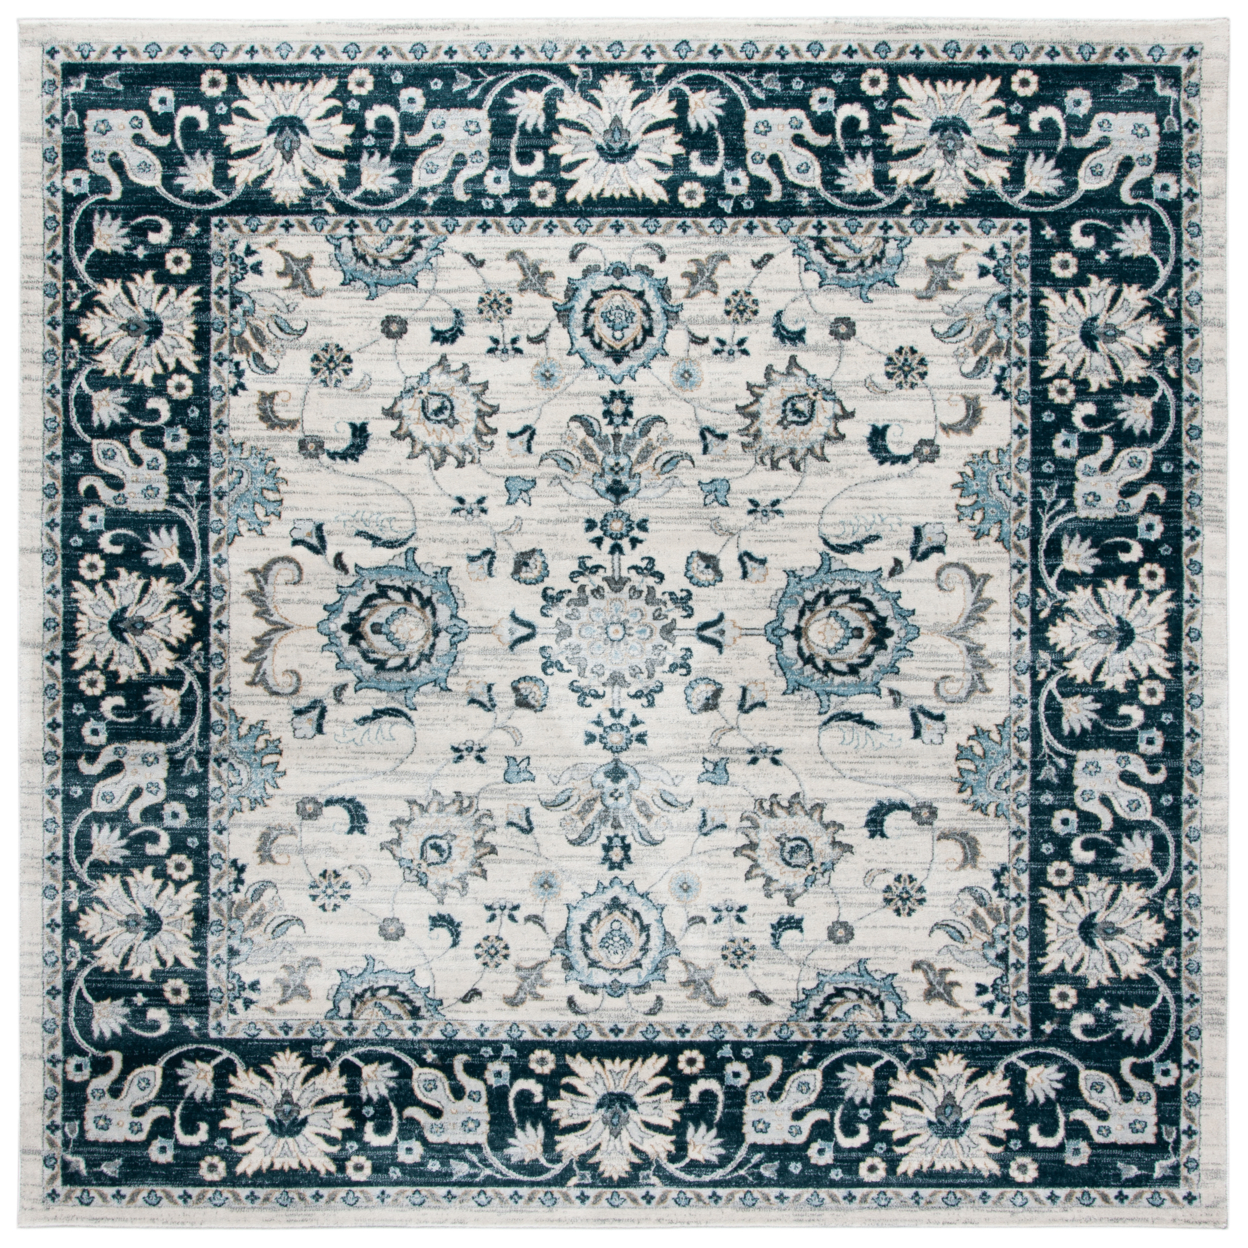 SAFAVIEH Isabella Collection ISA940A Cream / Navy Rug - 4' Square